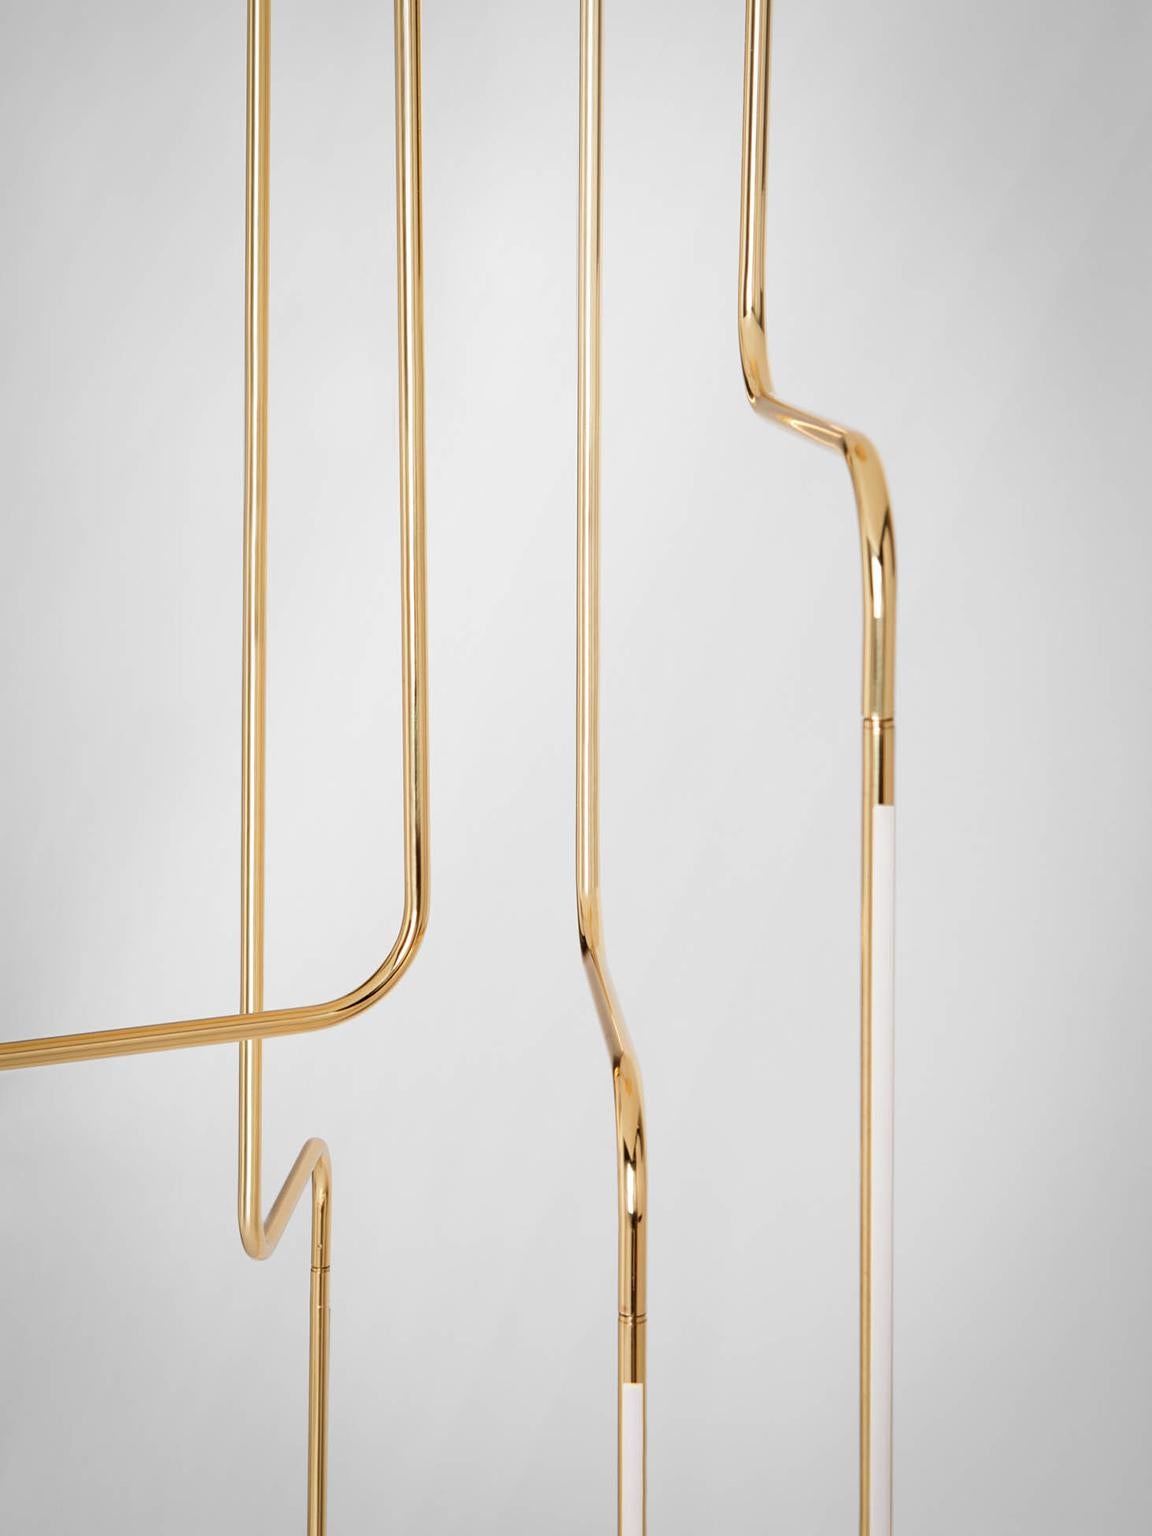 SEM Gold collection, four arms composition ceiling lamp in polished or fine brushed tubular brass with double joint. Different sizes and compositions: H 110/155/175 cm. Horizontal arm length measurement 20 cm. Lamp type LED 6W - 3000°K Voltage